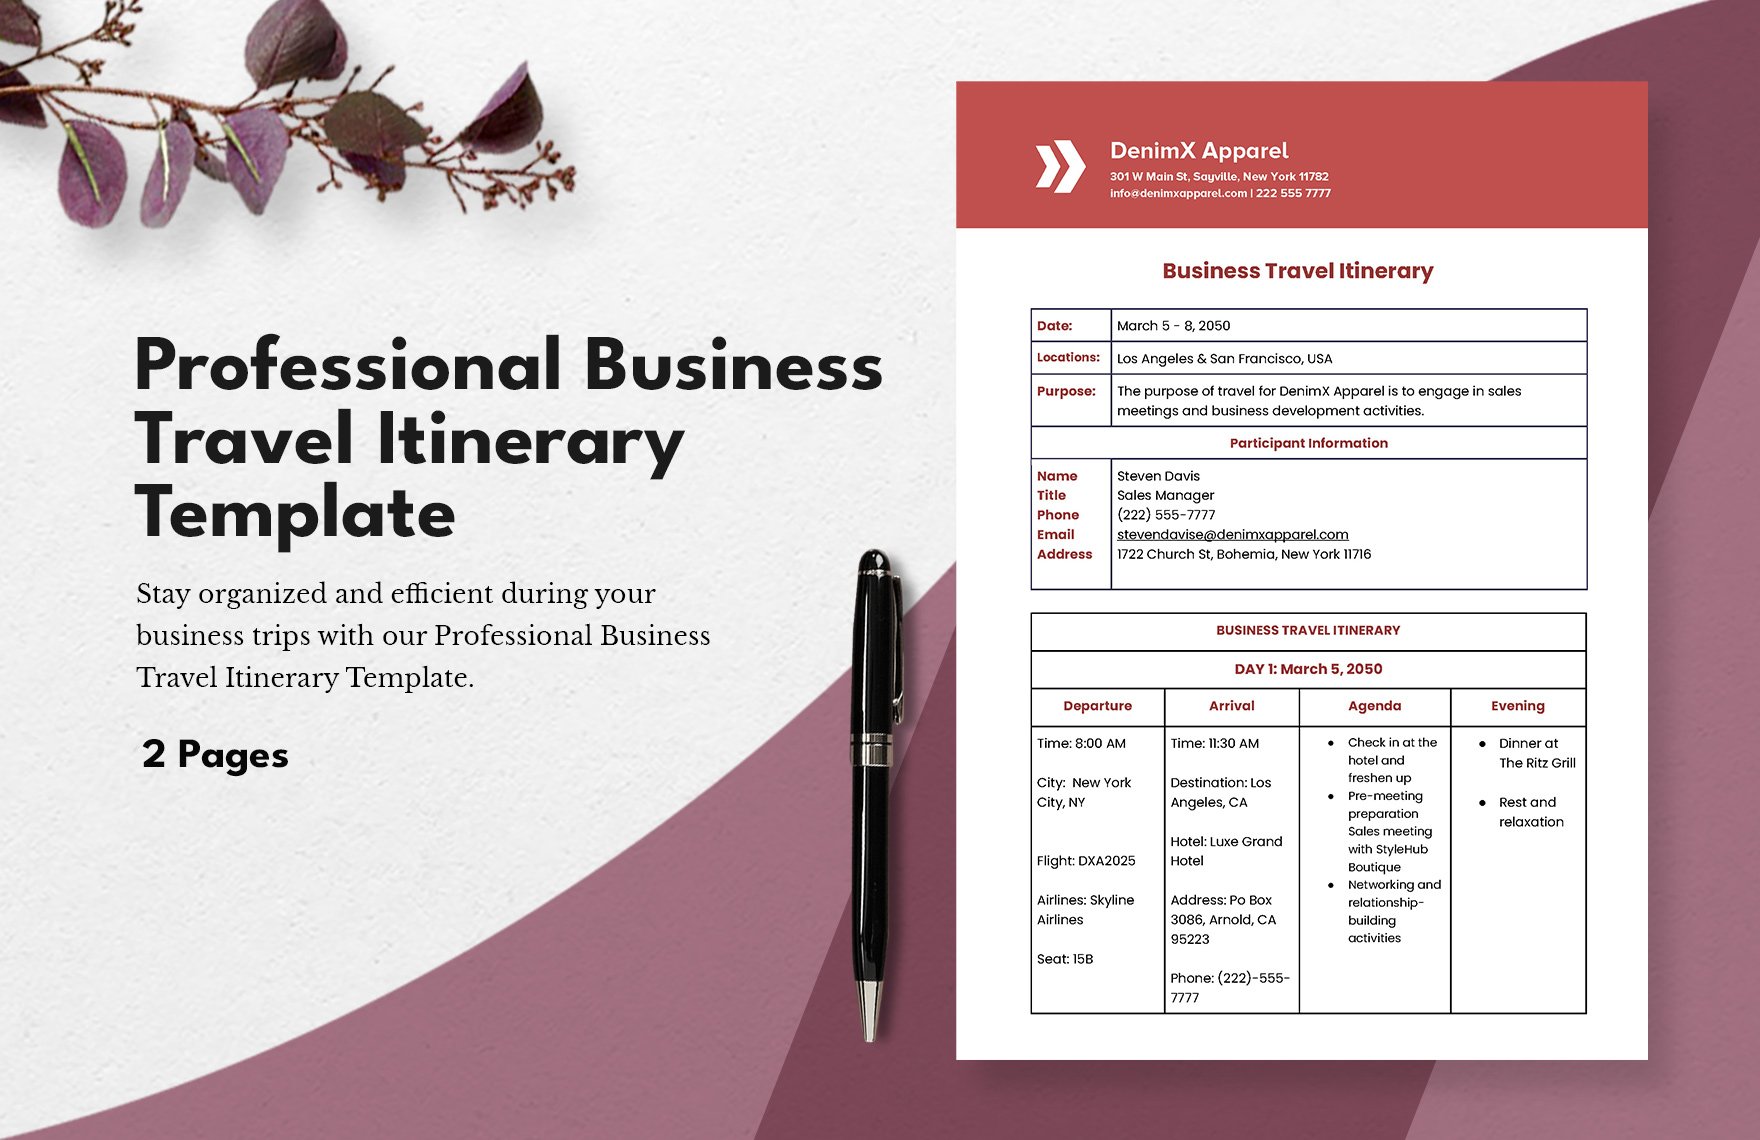 Professional Business Travel Itinerary Template